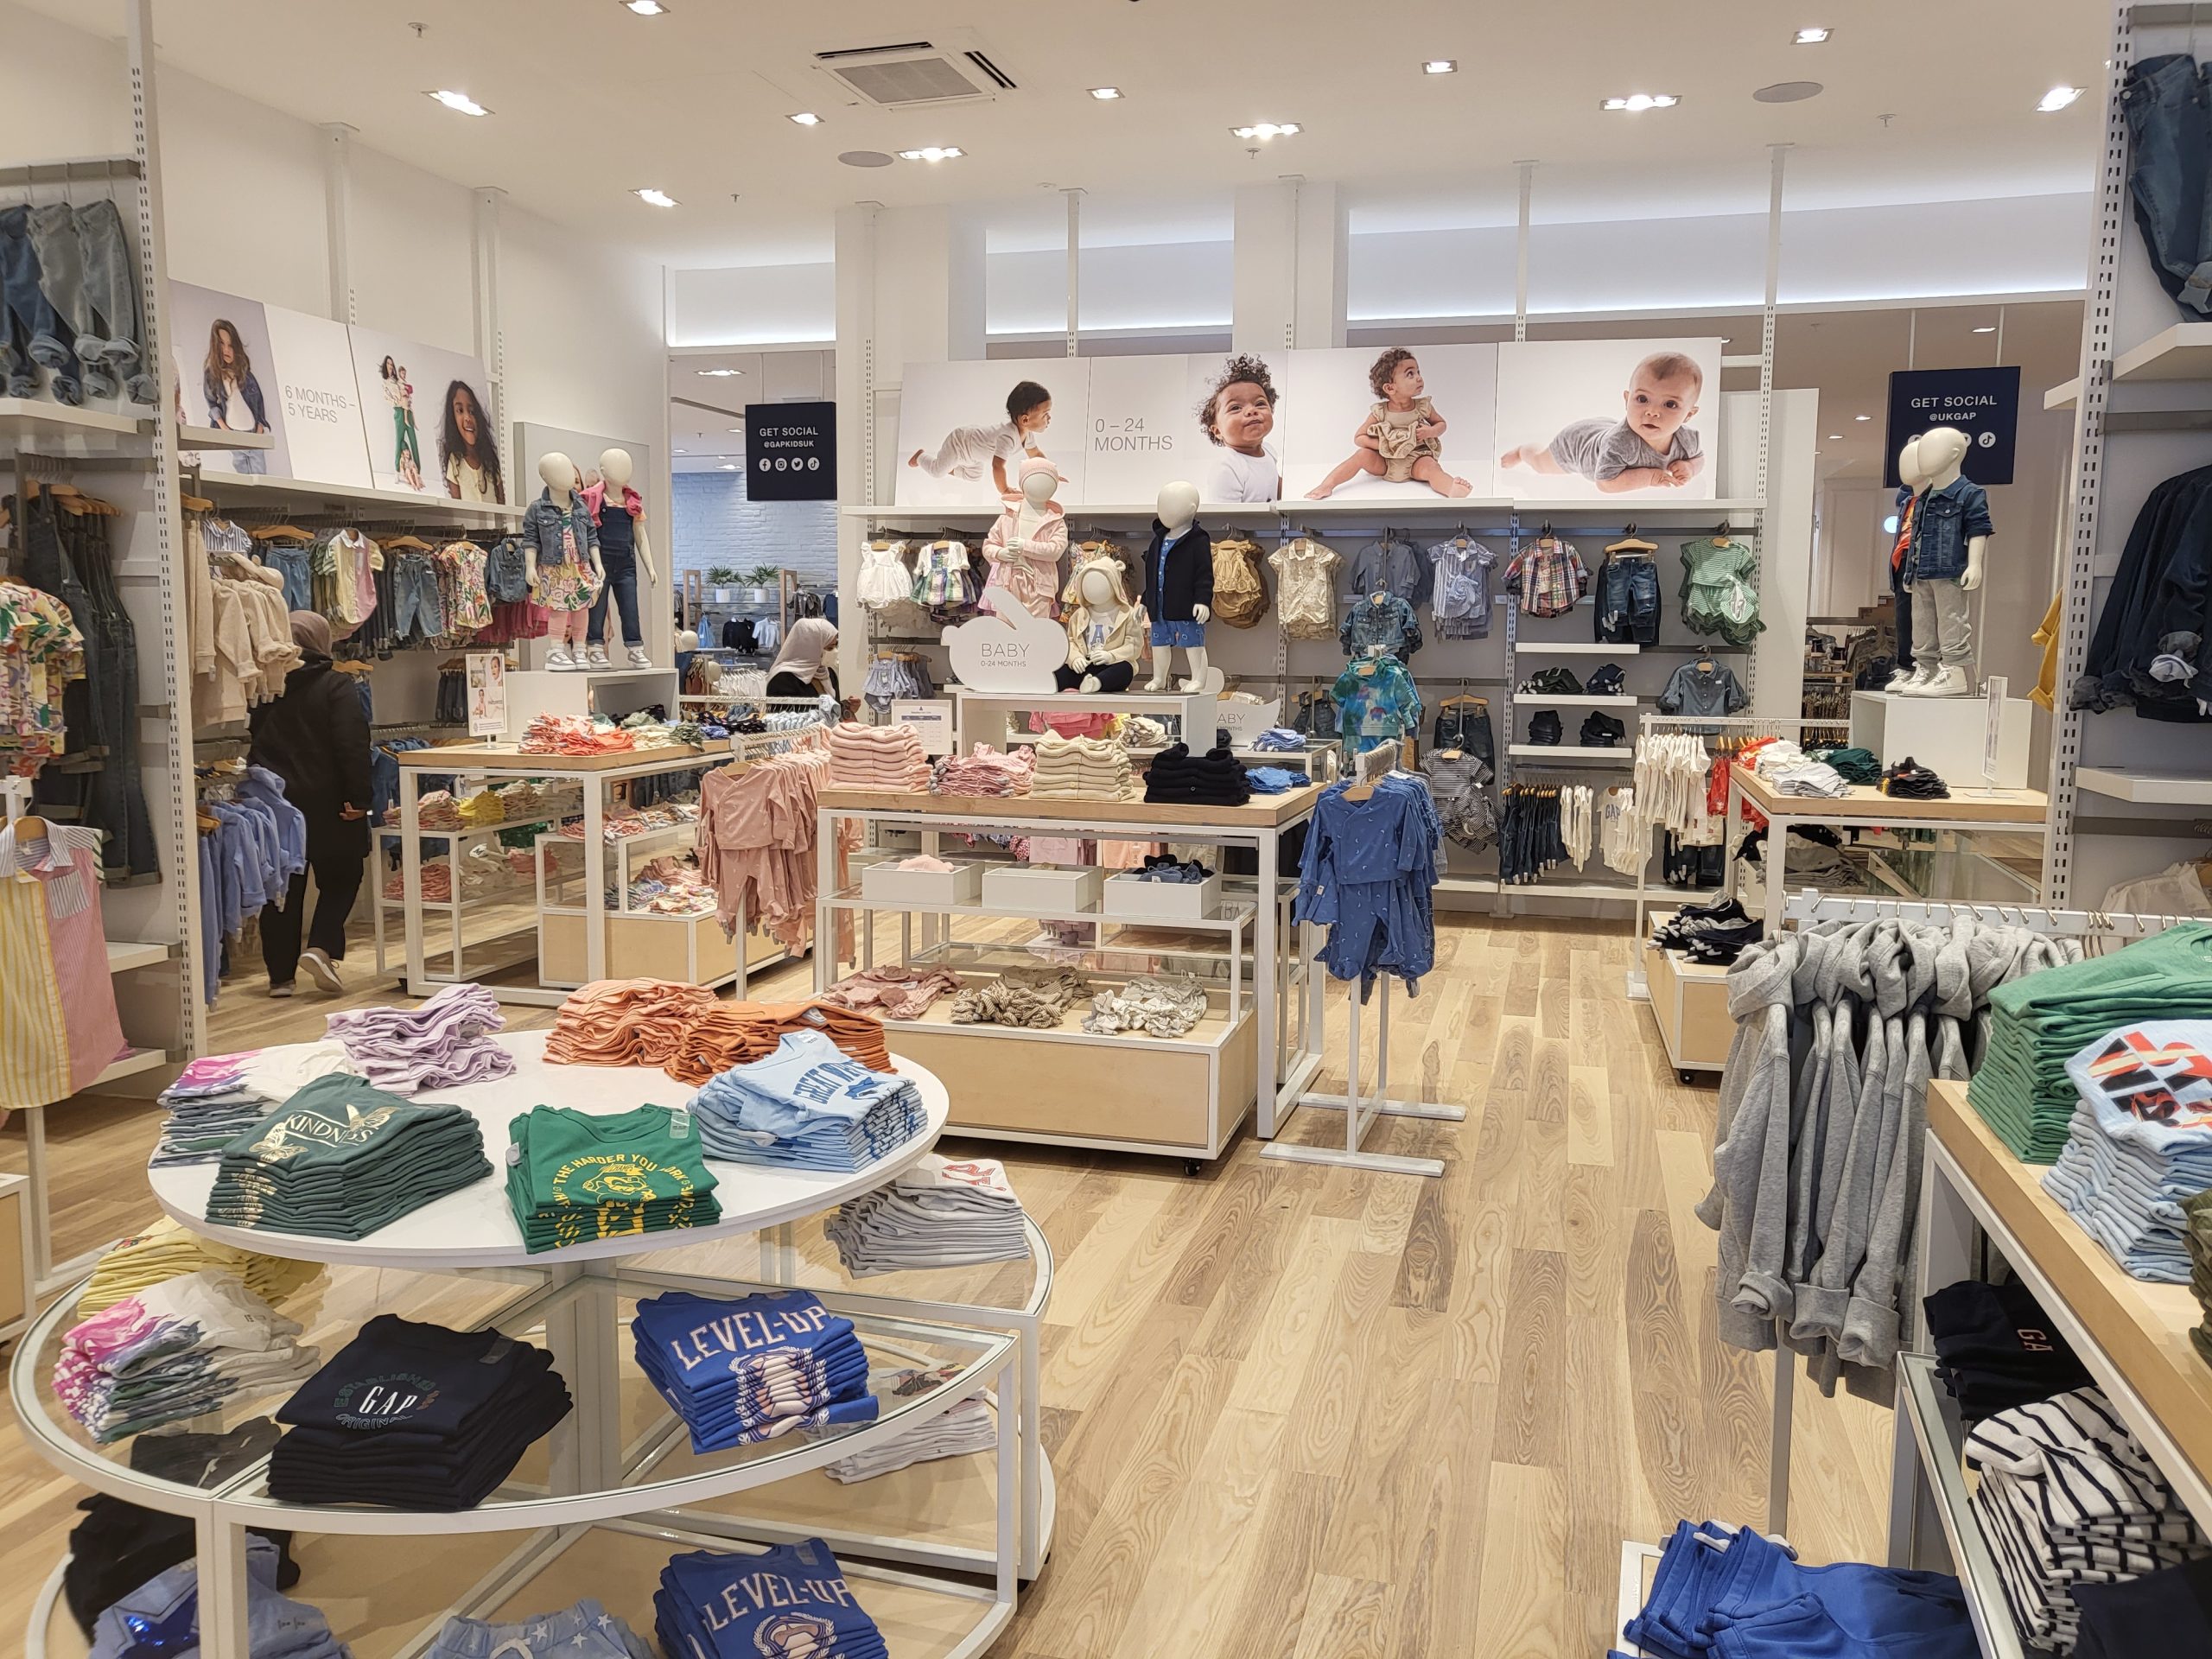 Kidswear dominates the Gap concession at Next's Oxford Street store